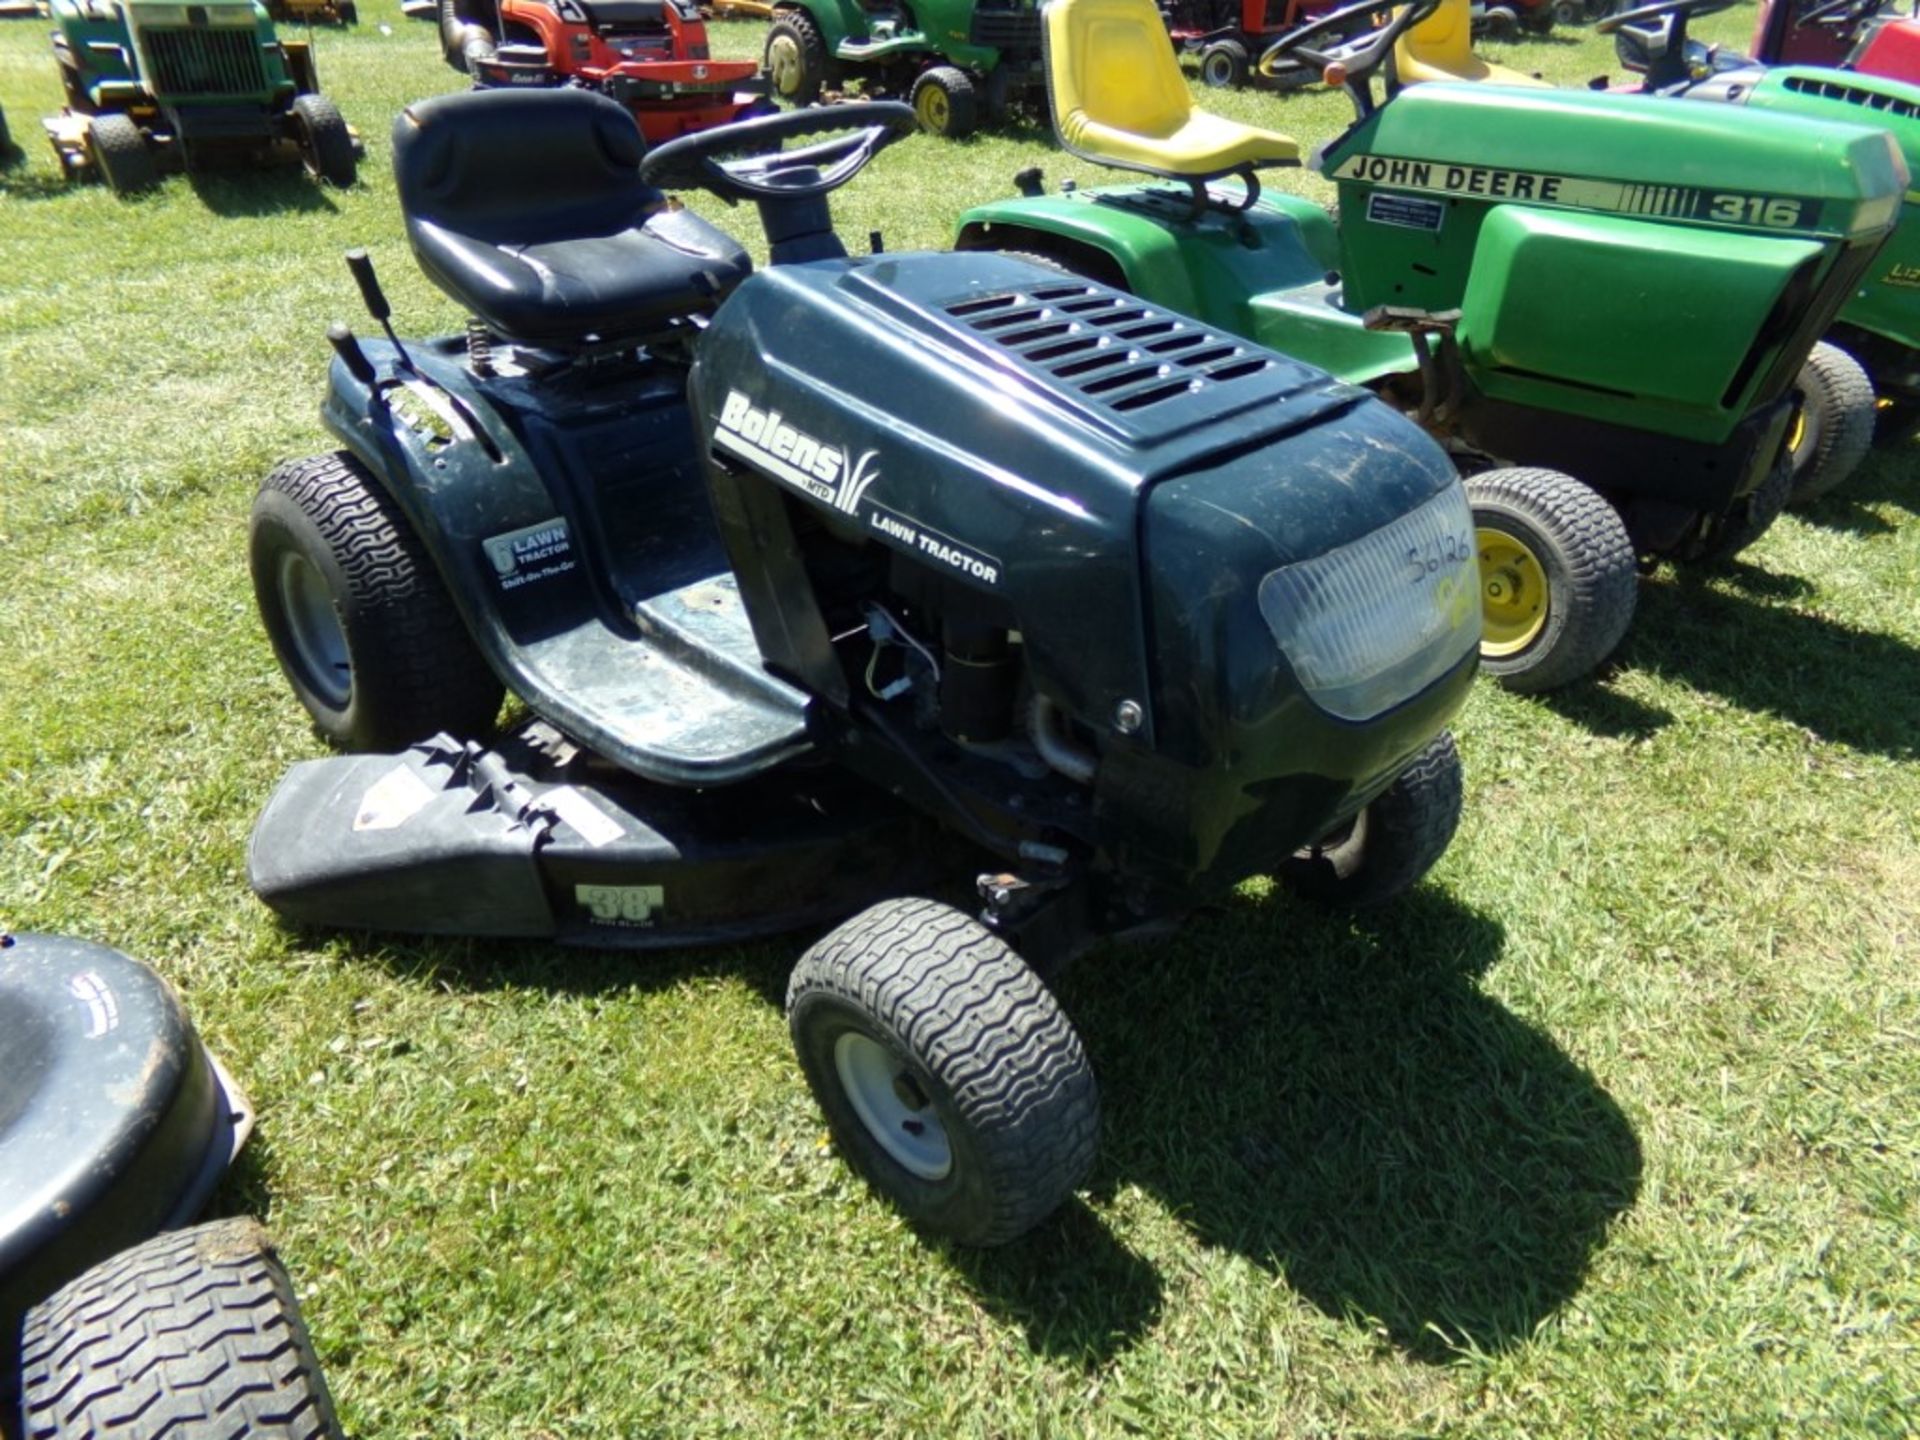 Bolens MTD 6 Speed Lawn Tractor with 38'' Deck and 13.5 HP Motor (6126) - Image 2 of 2